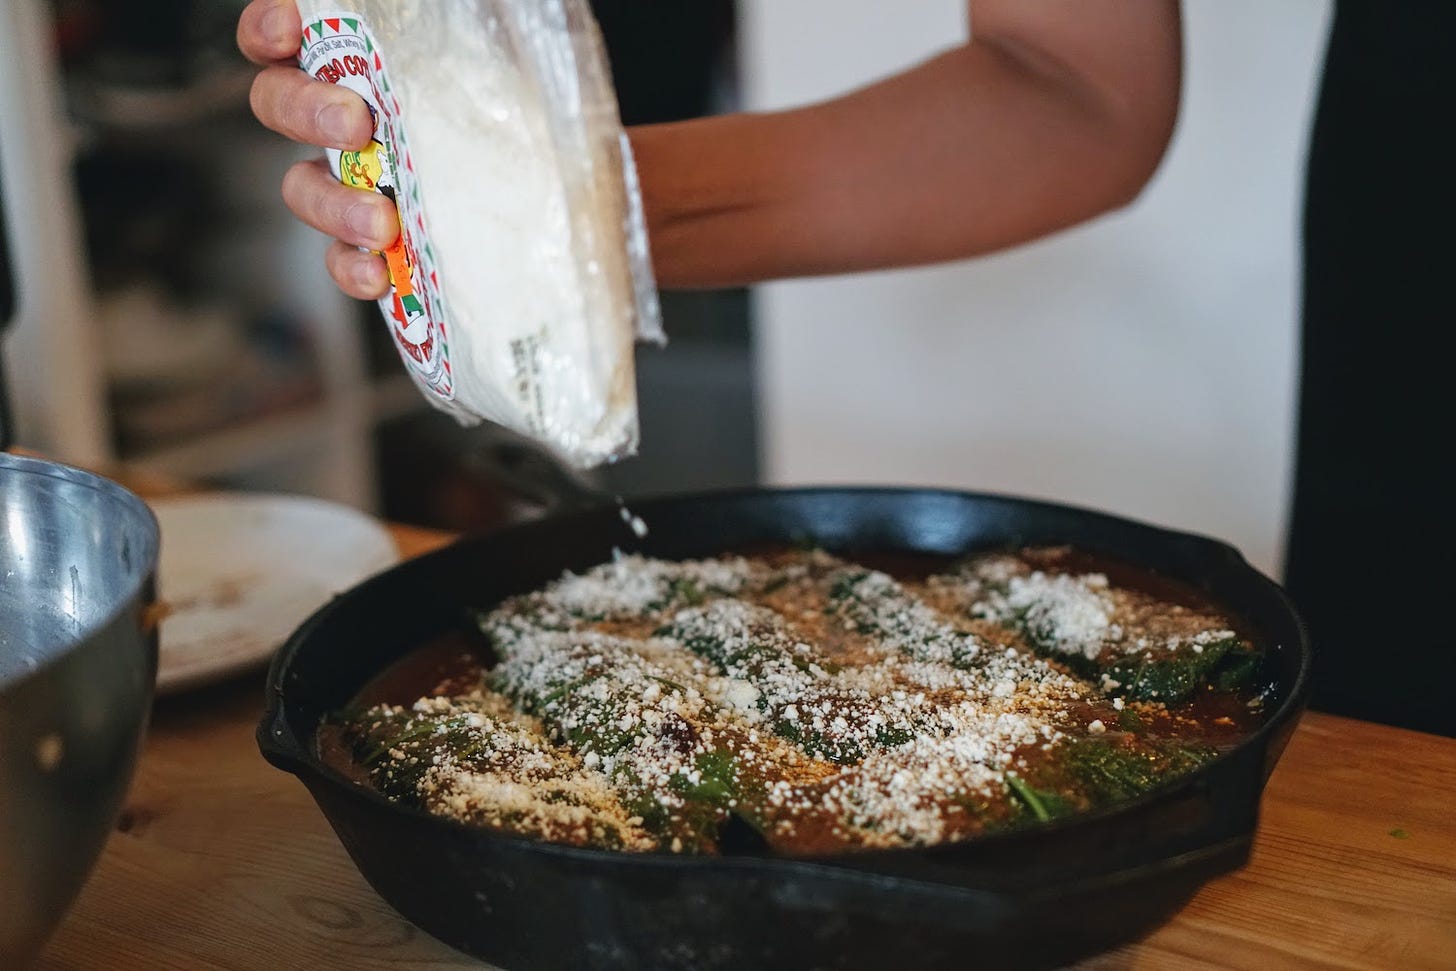 Sprinkling cotija cheese onto collared green enchiladas in a cast iron pan